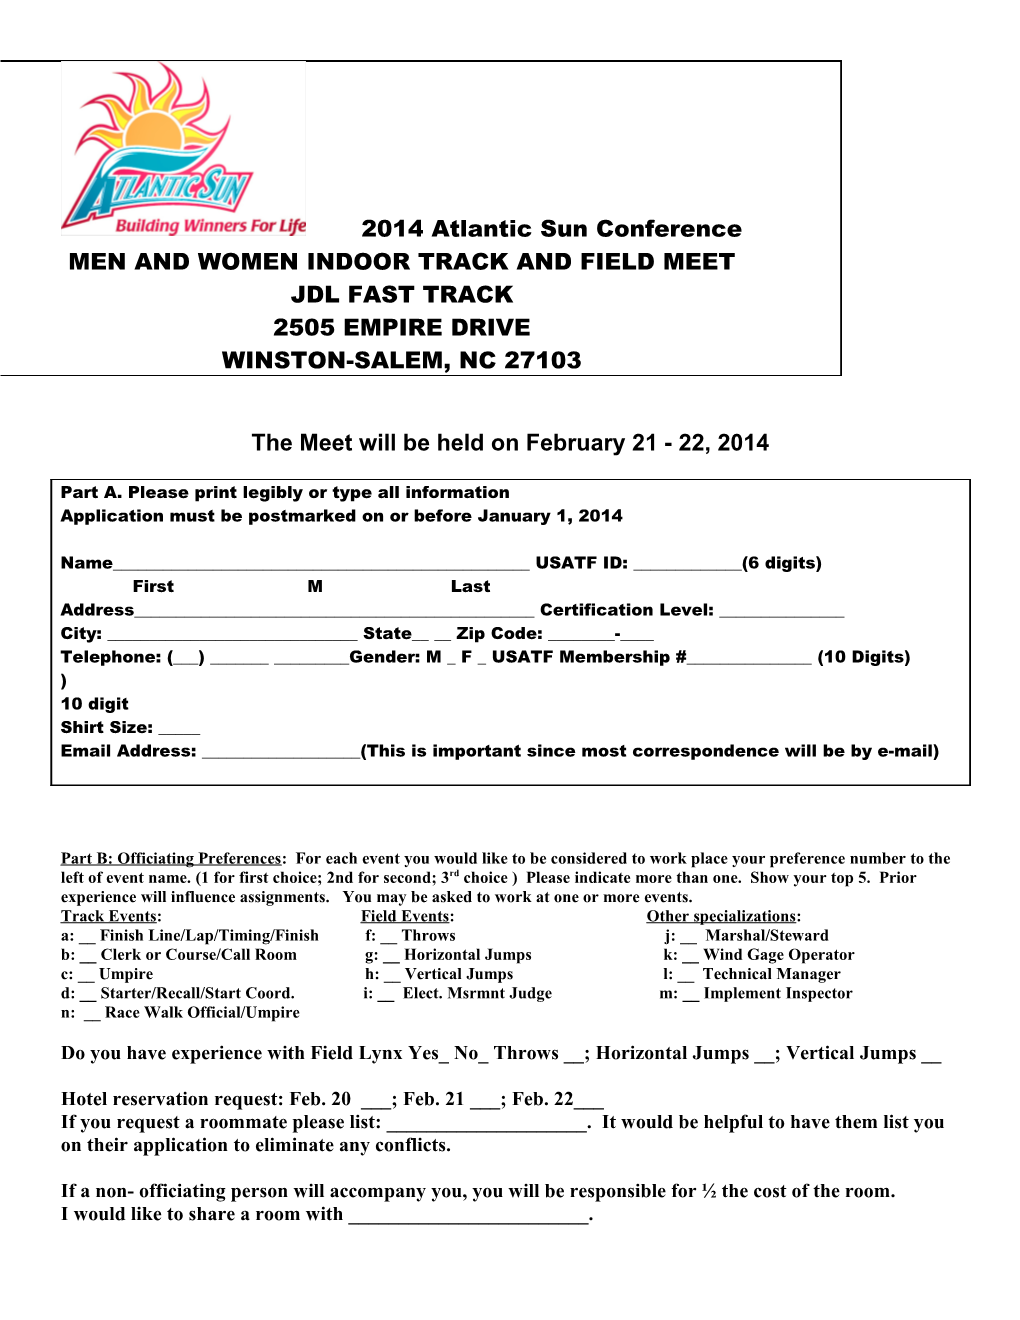 The Meet Will Be Held on February 21 - 22, 2014